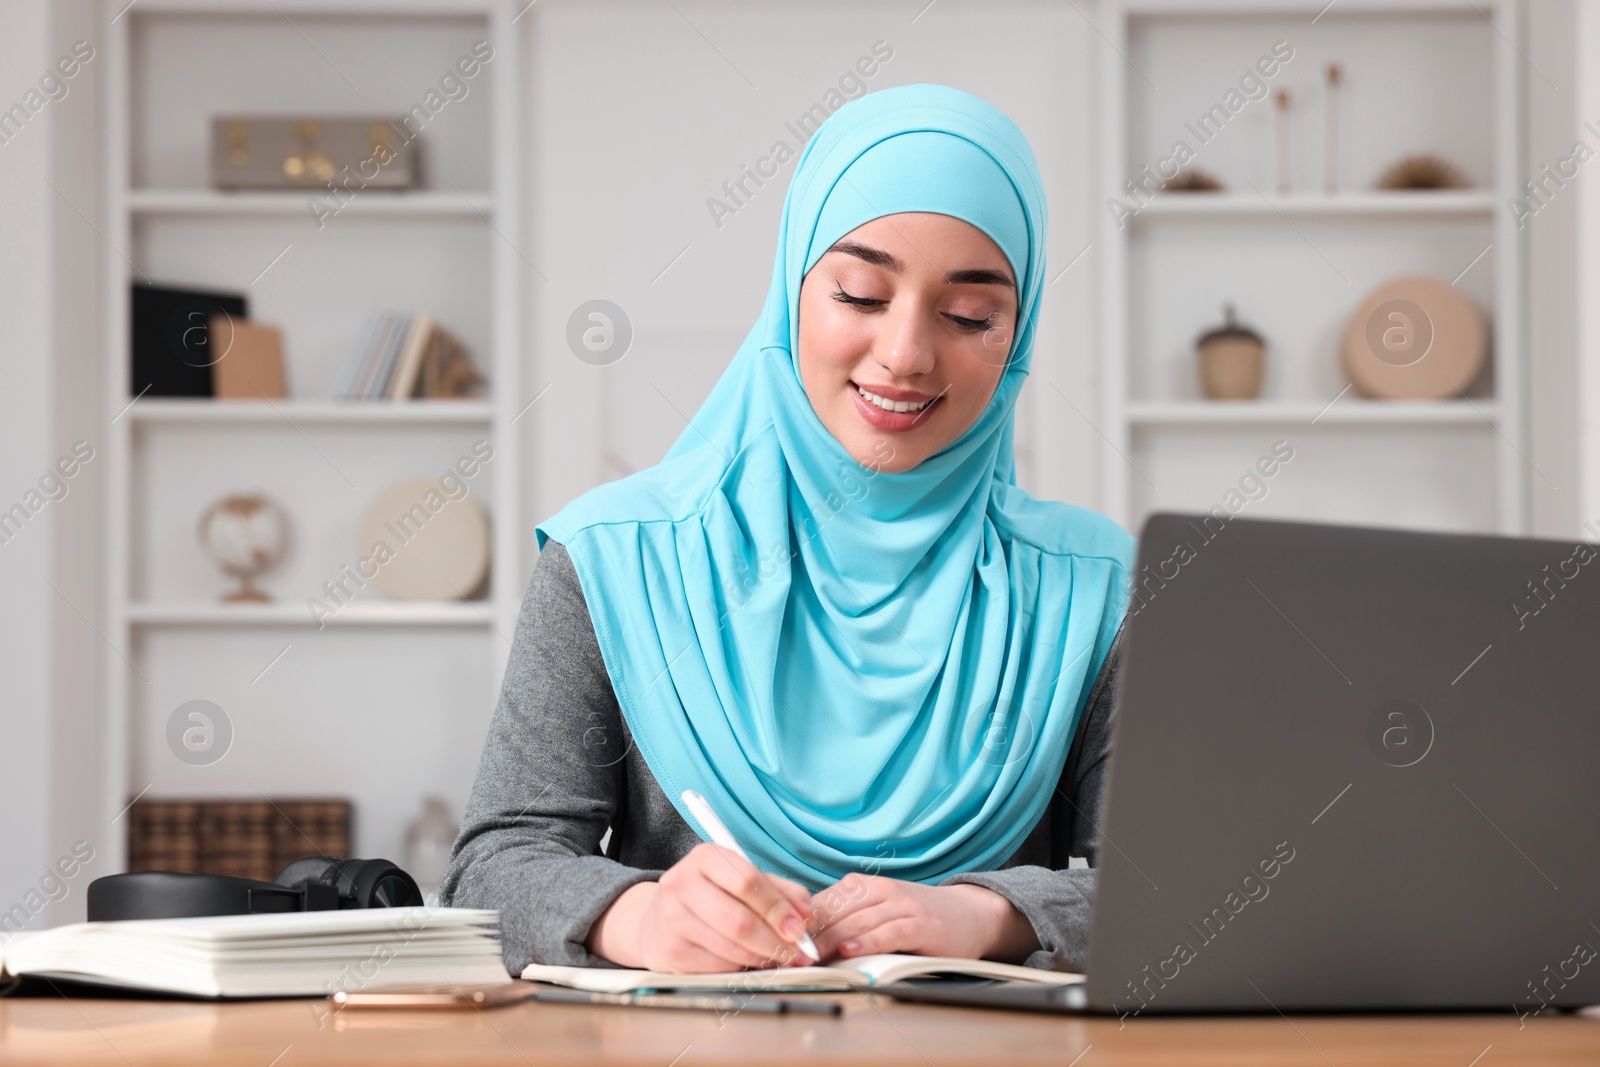 Photo of Muslim woman writing notes near laptop at wooden table in room